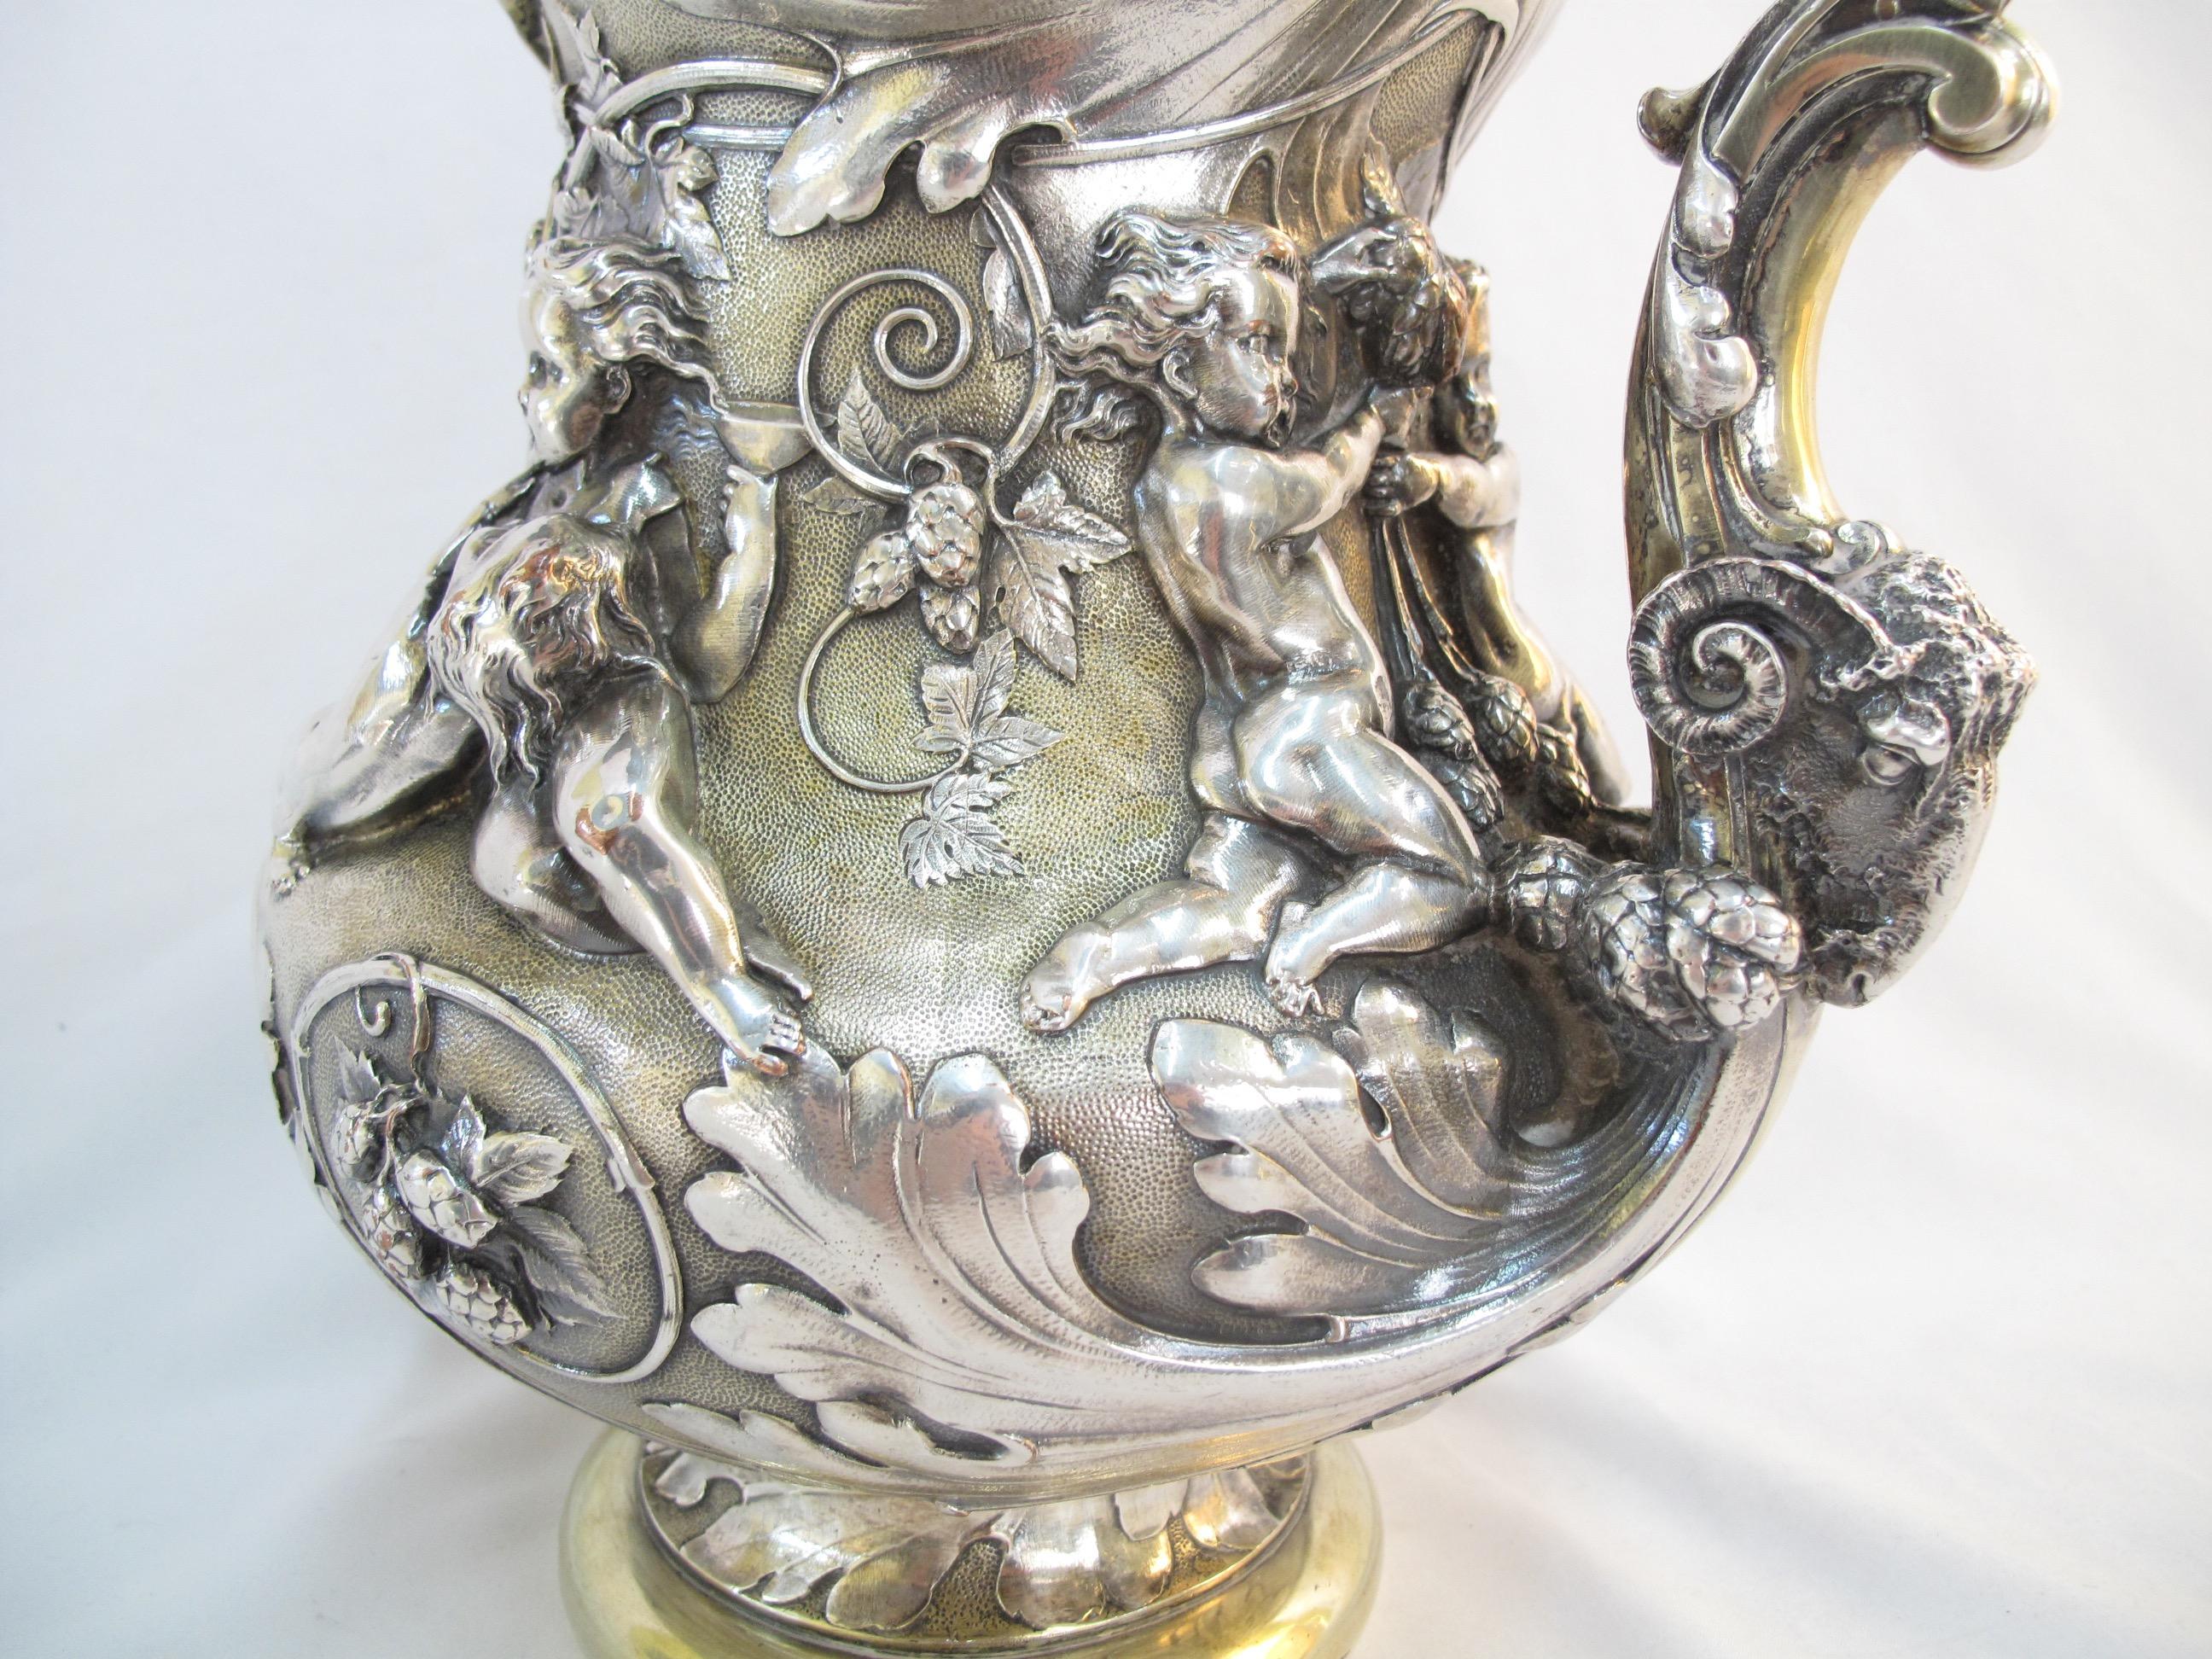 Large Ornate Putti Cavorting Among Hops Repousse Pitcher Elkington 19th Century For Sale 3